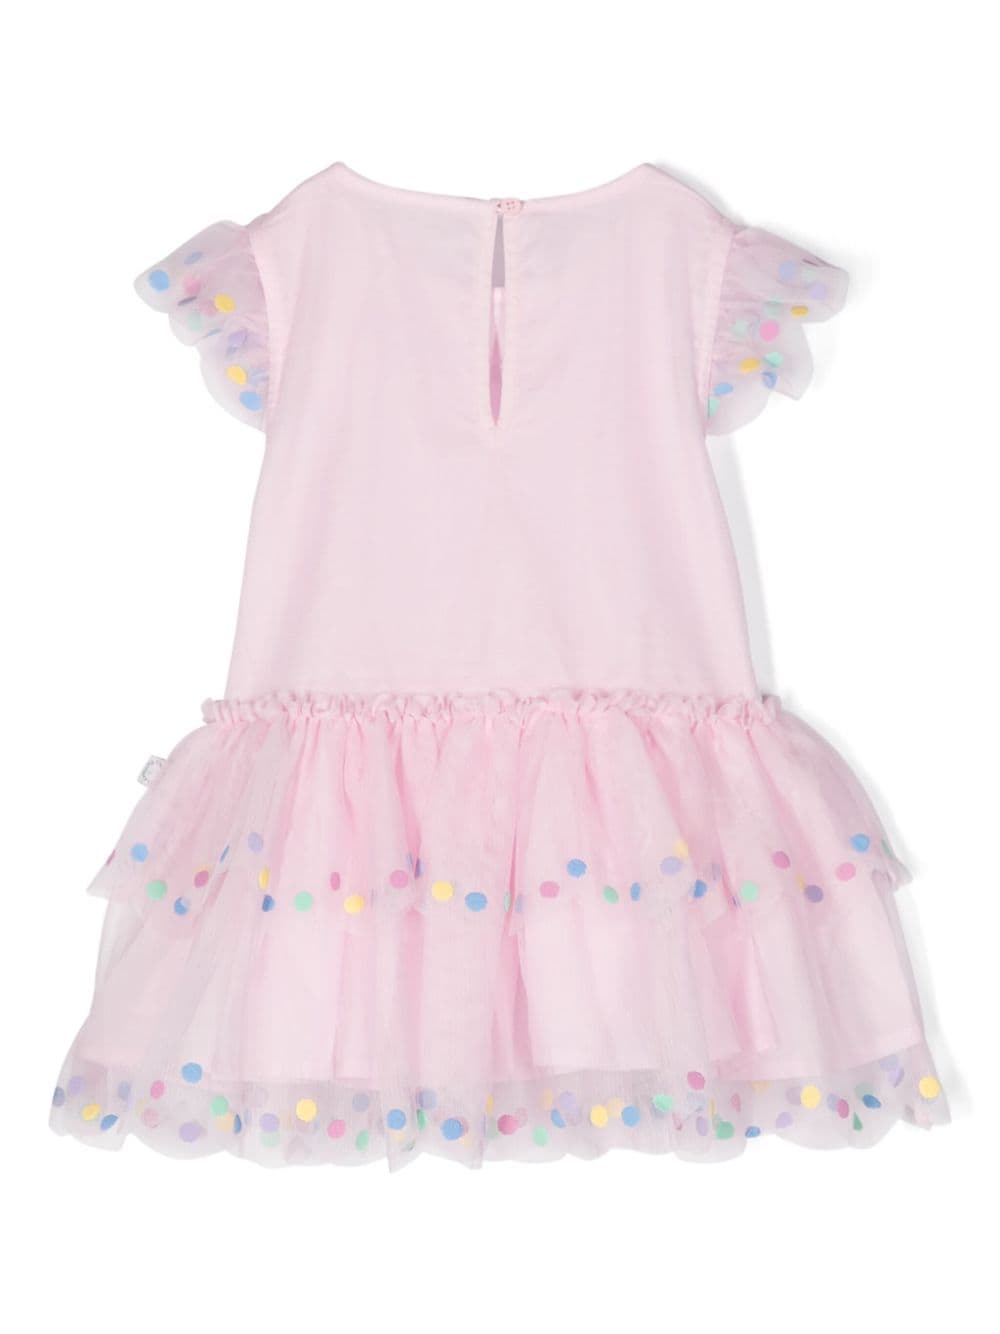 Pink dress for baby girls with tulle